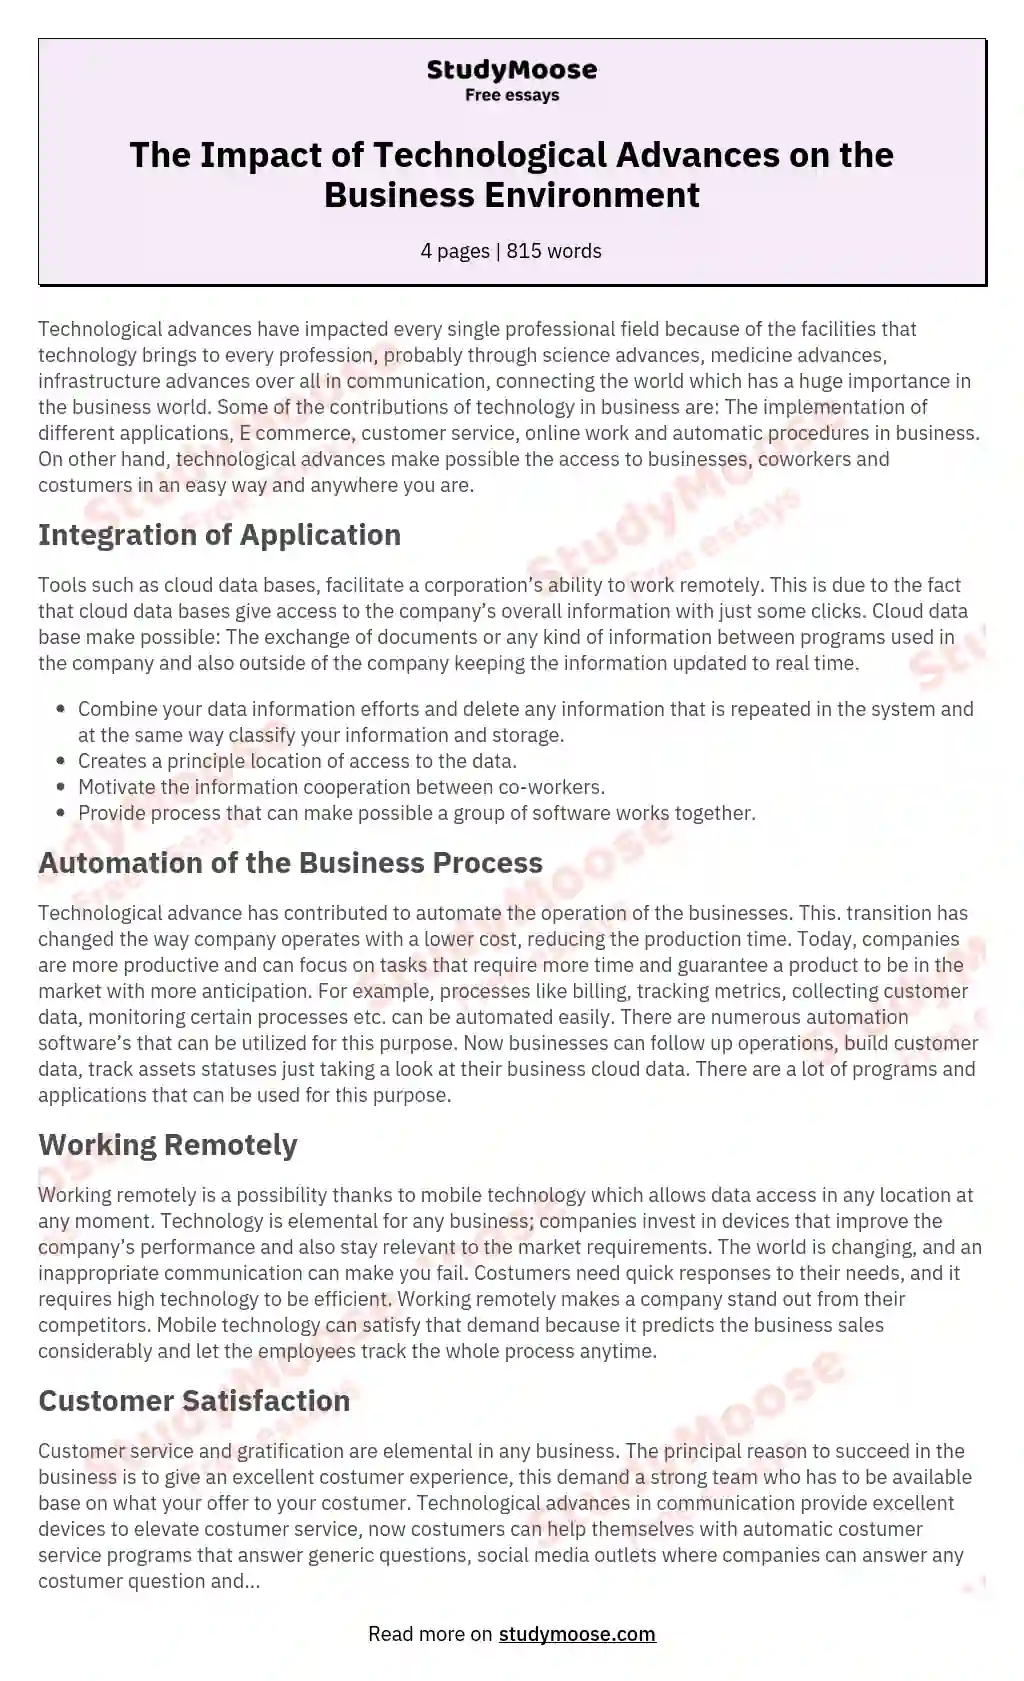 The Impact of Technological Advances on the Business Environment essay